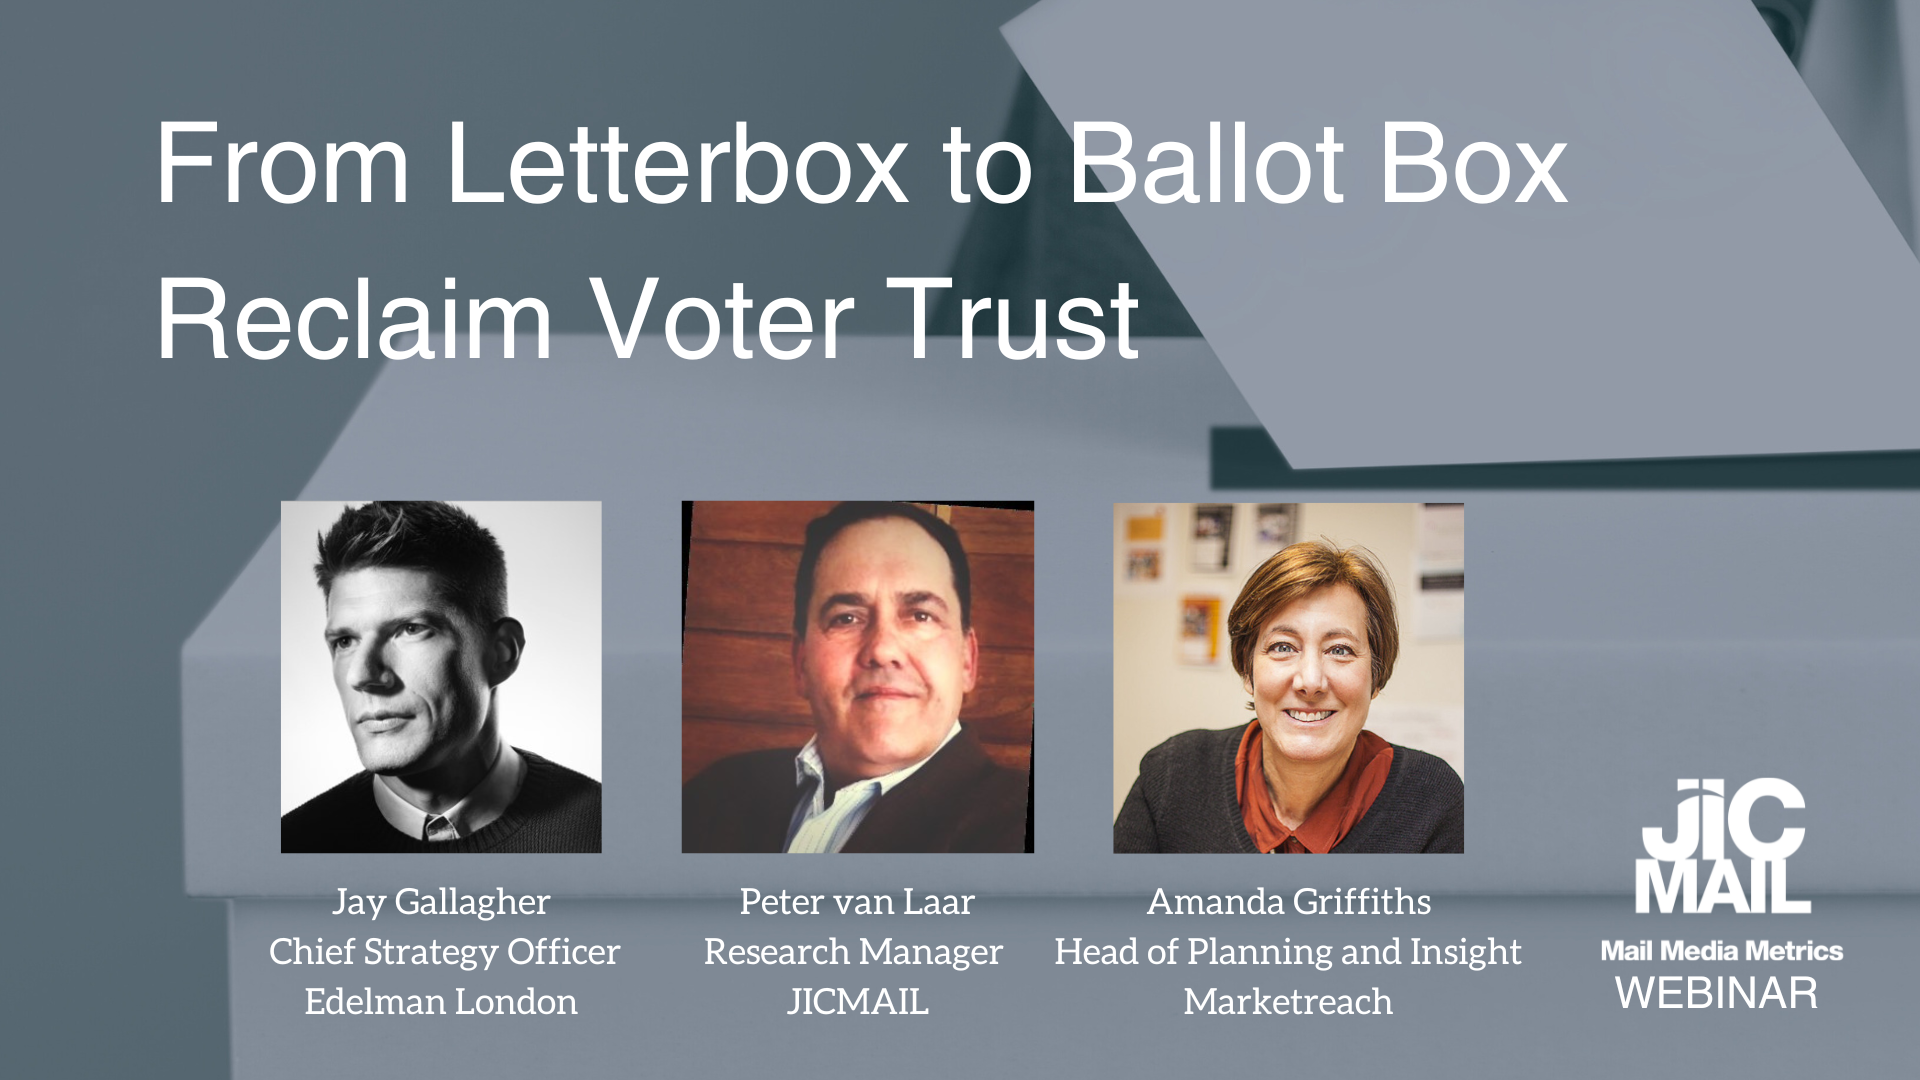 JICMAIL WEBINAR: From Letterbox to Ballot Box: Reclaim Voter Trust